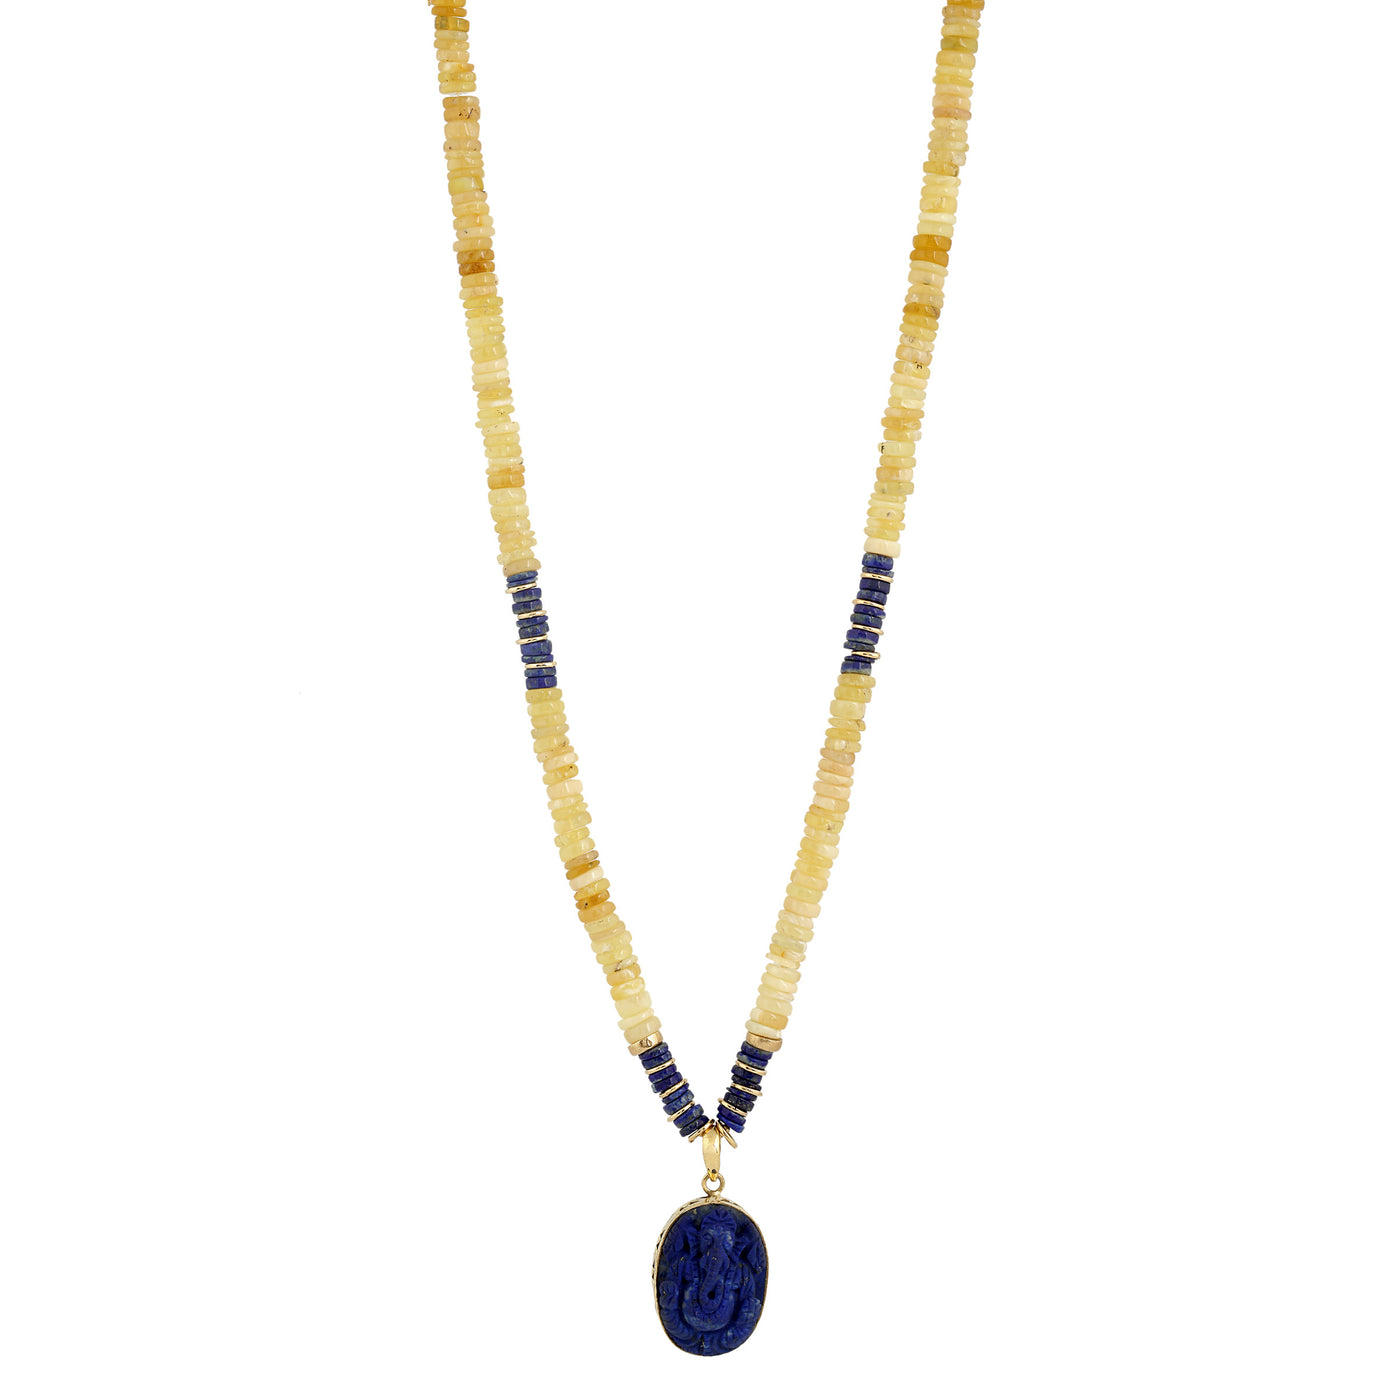 Yaka necklace with yellow opal and ganesh in lapis